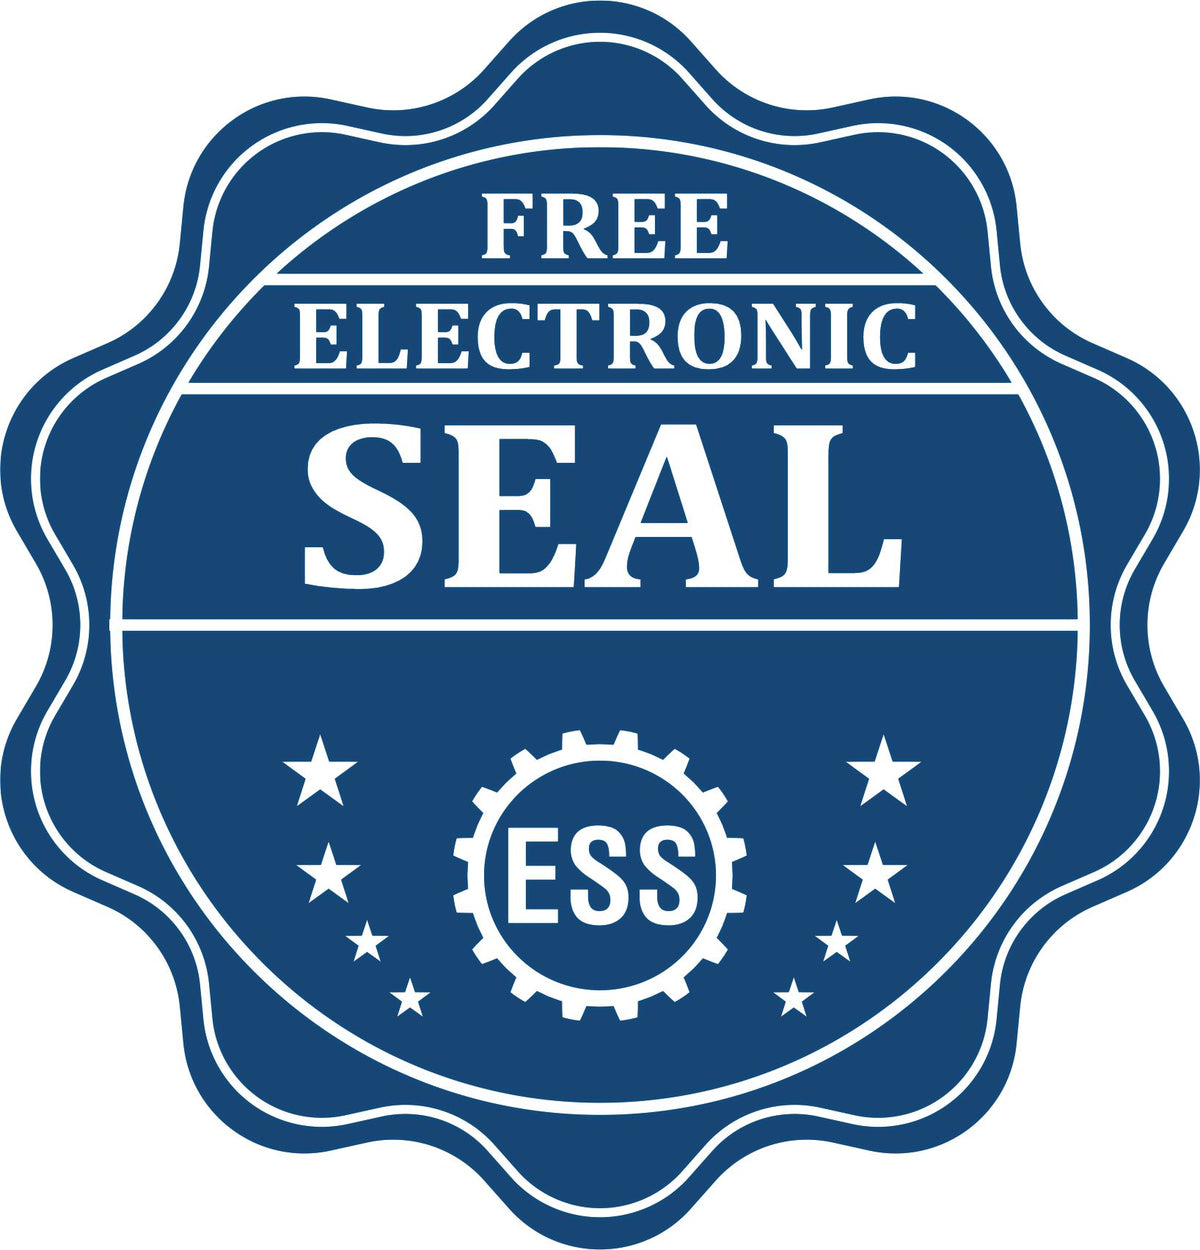 A badge showing a free electronic seal for the Slim Pre-Inked Arizona Professional Geologist Seal Stamp with stars and the ESS gear on the emblem.